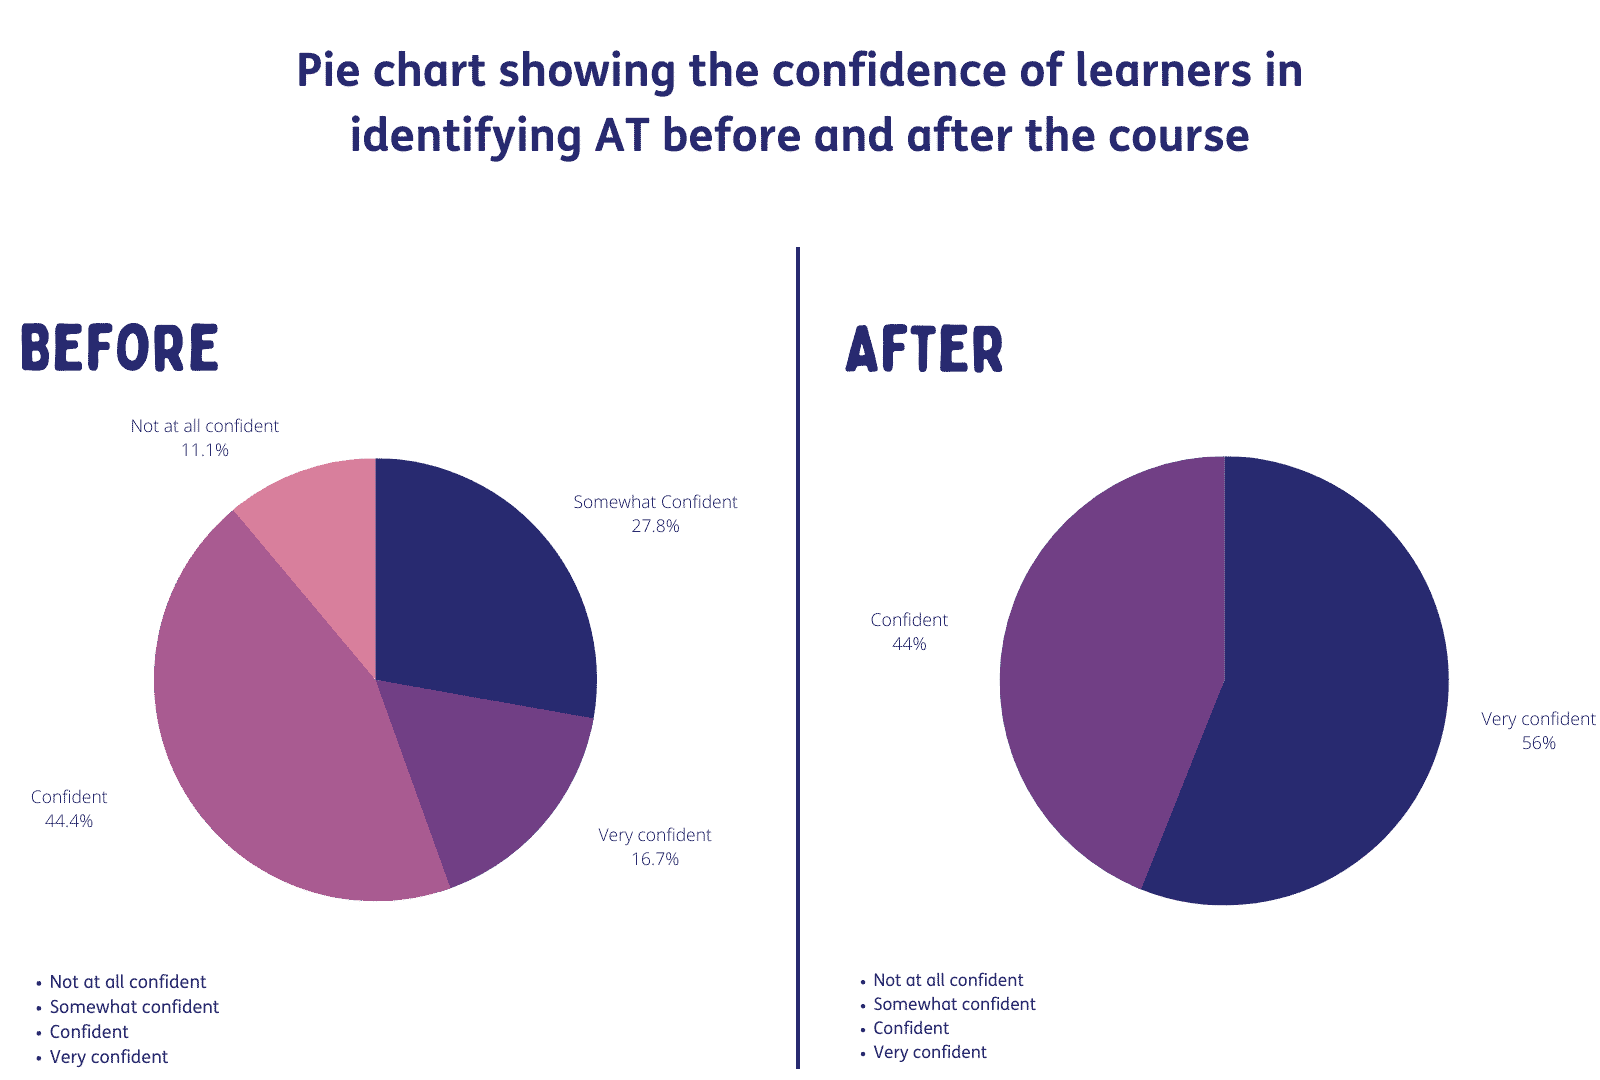 Title reads: pie charts showing the confidence of learners in identifying AT before and after the course. The pie chart titled on the left is labelled "before". The segments are labelled with the following statistics, from largest to smallest. Confident 44.4%, somewhat confident 27.8%, very confident 16.7%, not at all confident 11.1%. The pie chart on the right is labelled "before". The segments are labelled with the following statistics, from largest to smallest. Very confident 56%, confident 44%.